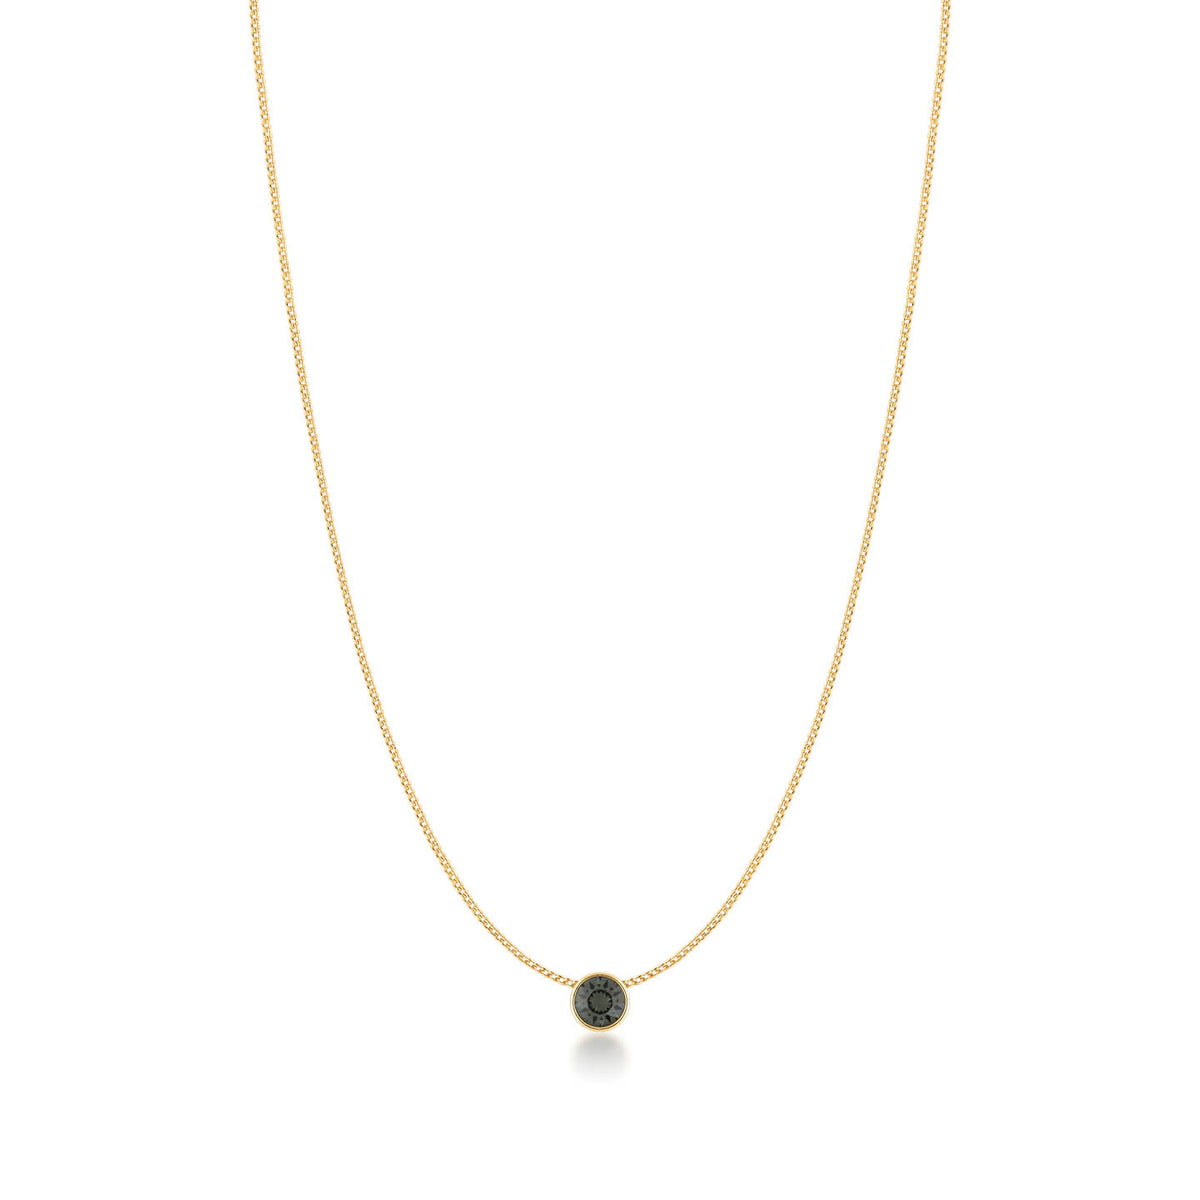 Harley Small Pendant Necklace with Black Diamond Round Crystals from Swarovski Gold Plated - Ed Heart